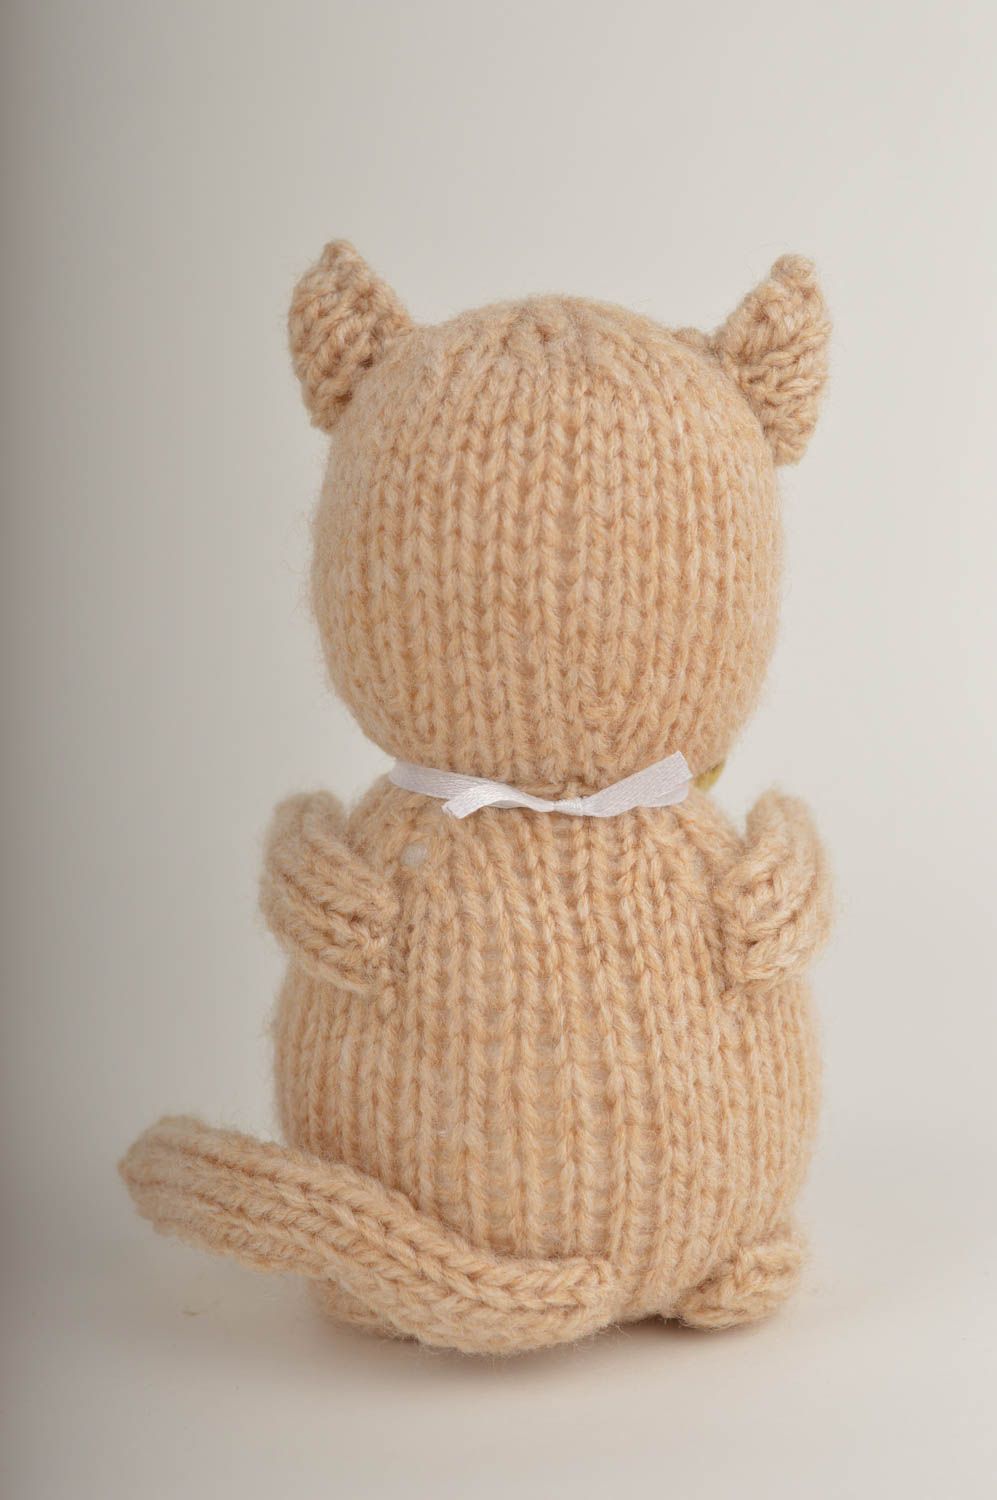 Handmade brown cute toy knitted stylish toy unusual soft accessory for nursery photo 5